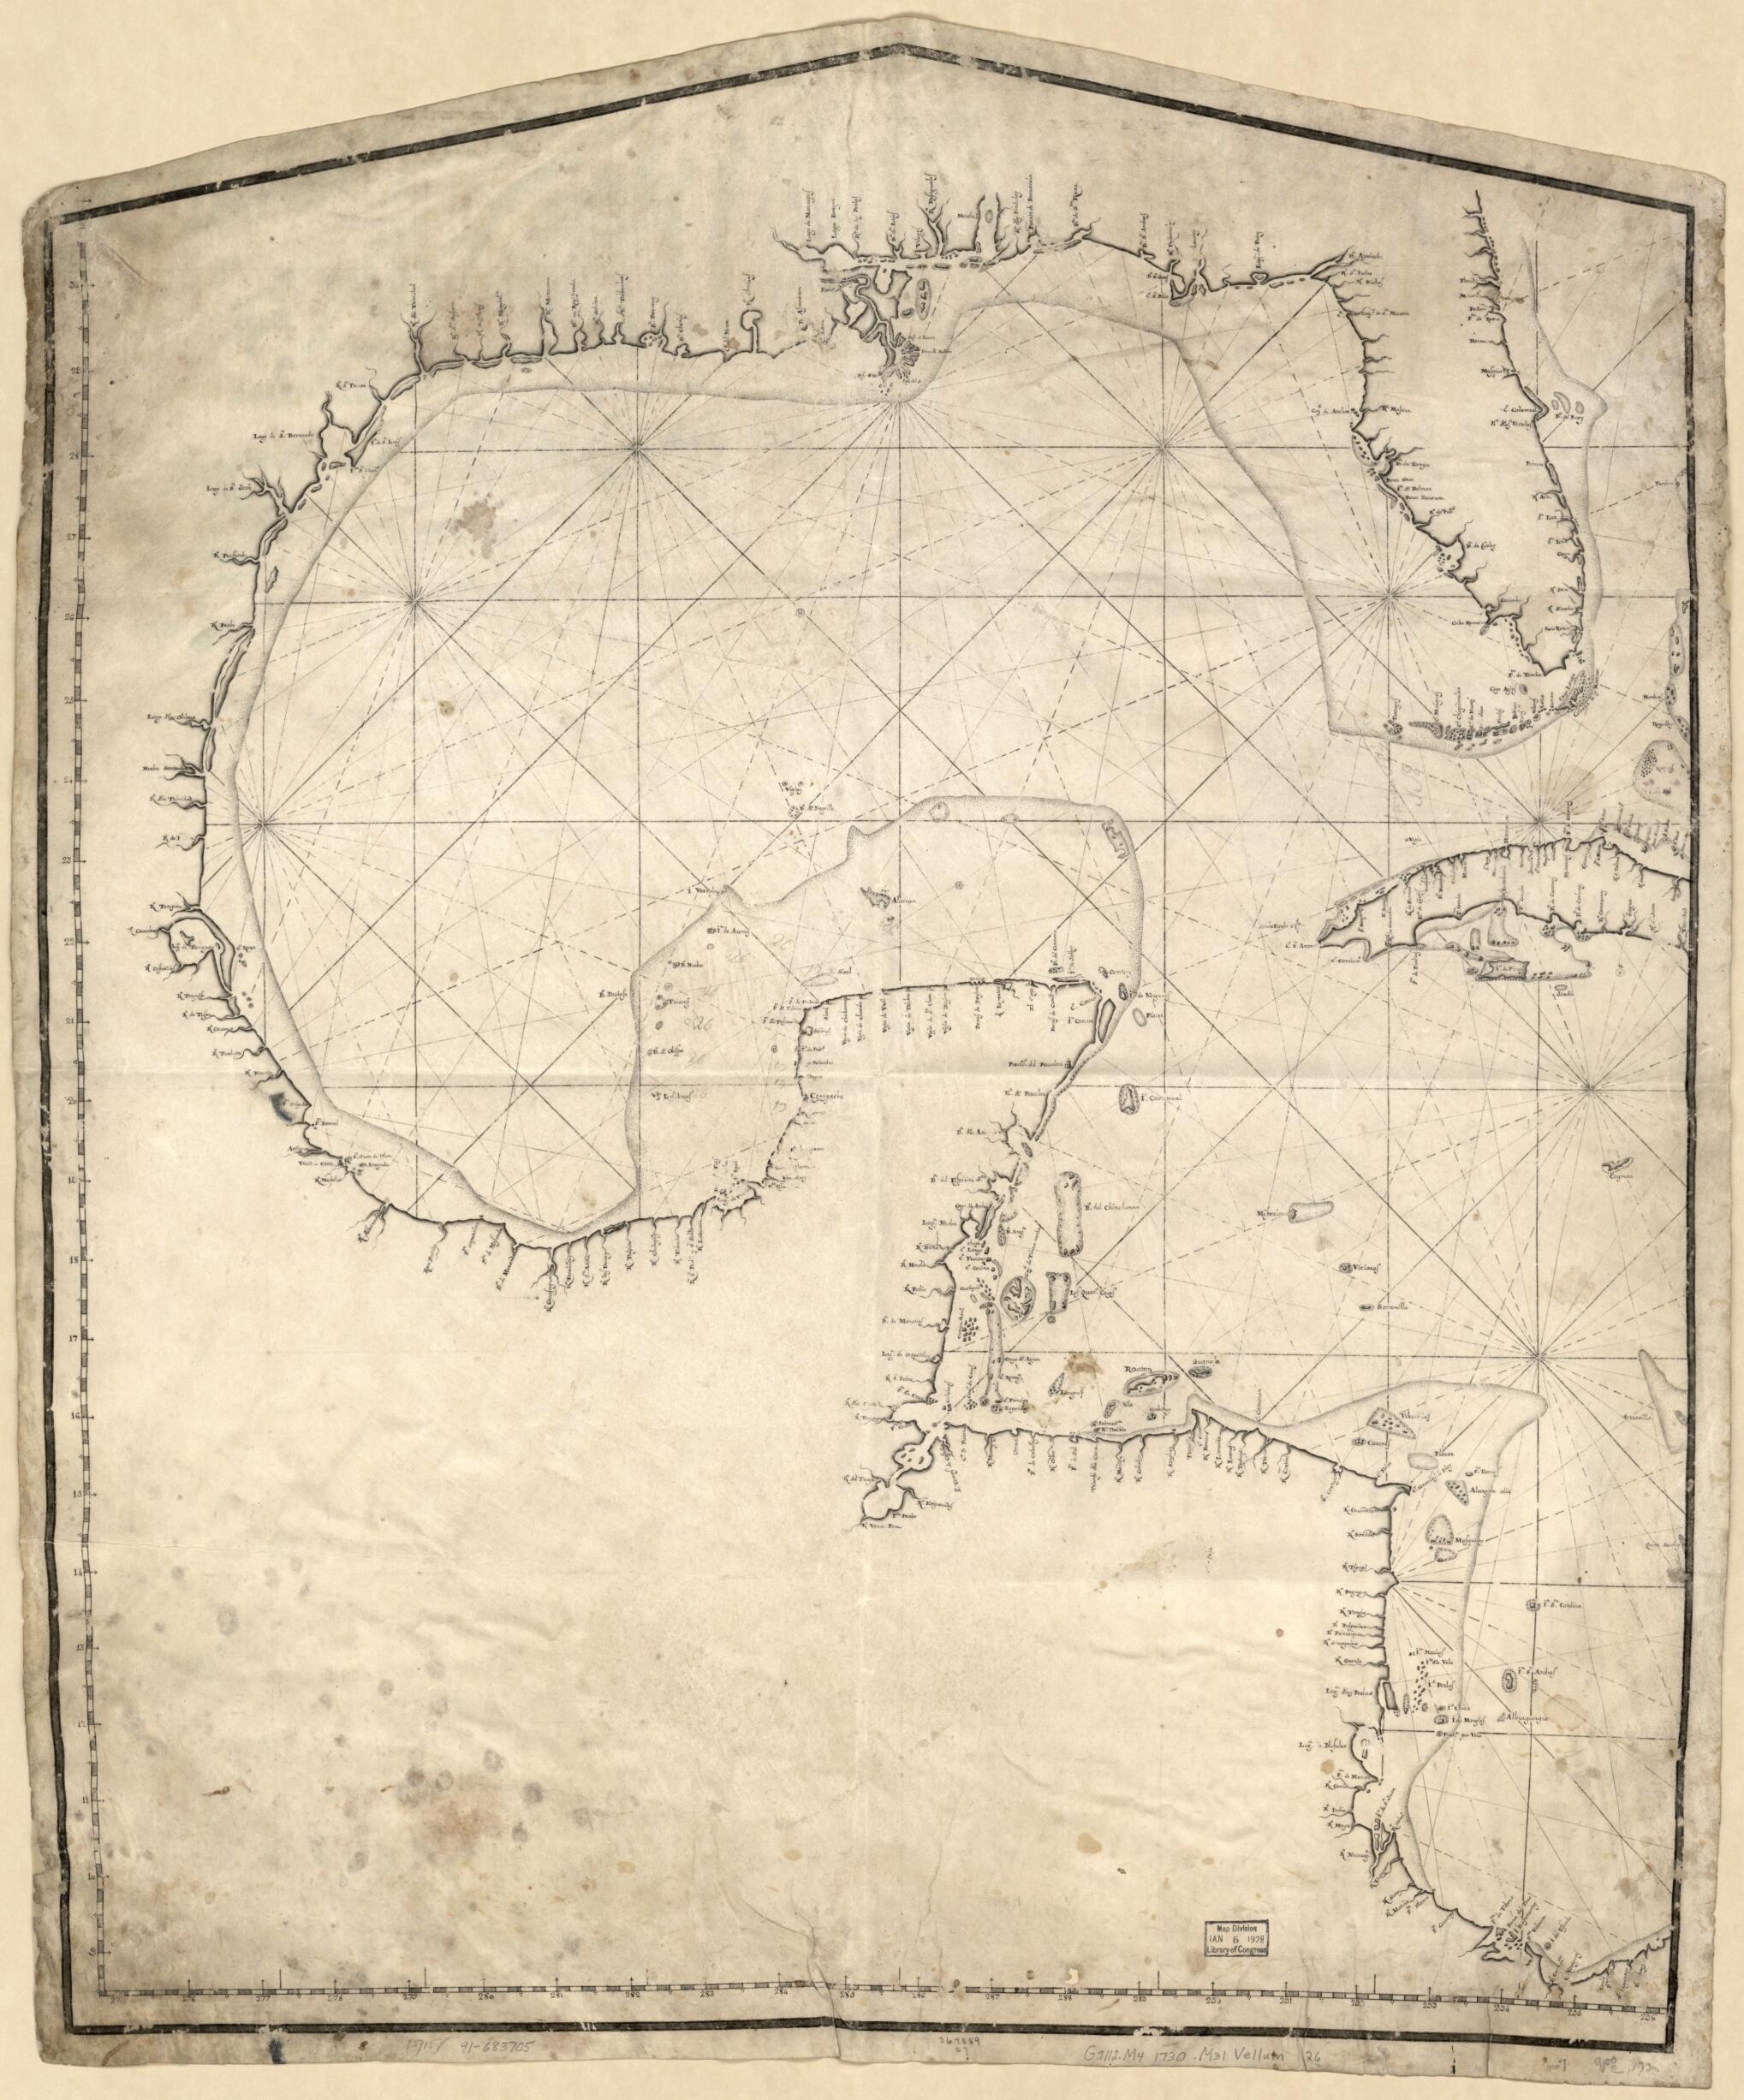 This old map of Map Showing Gulf of Mexico Including Western Portion of Caribbean Area from 1730 was created by  in 1730